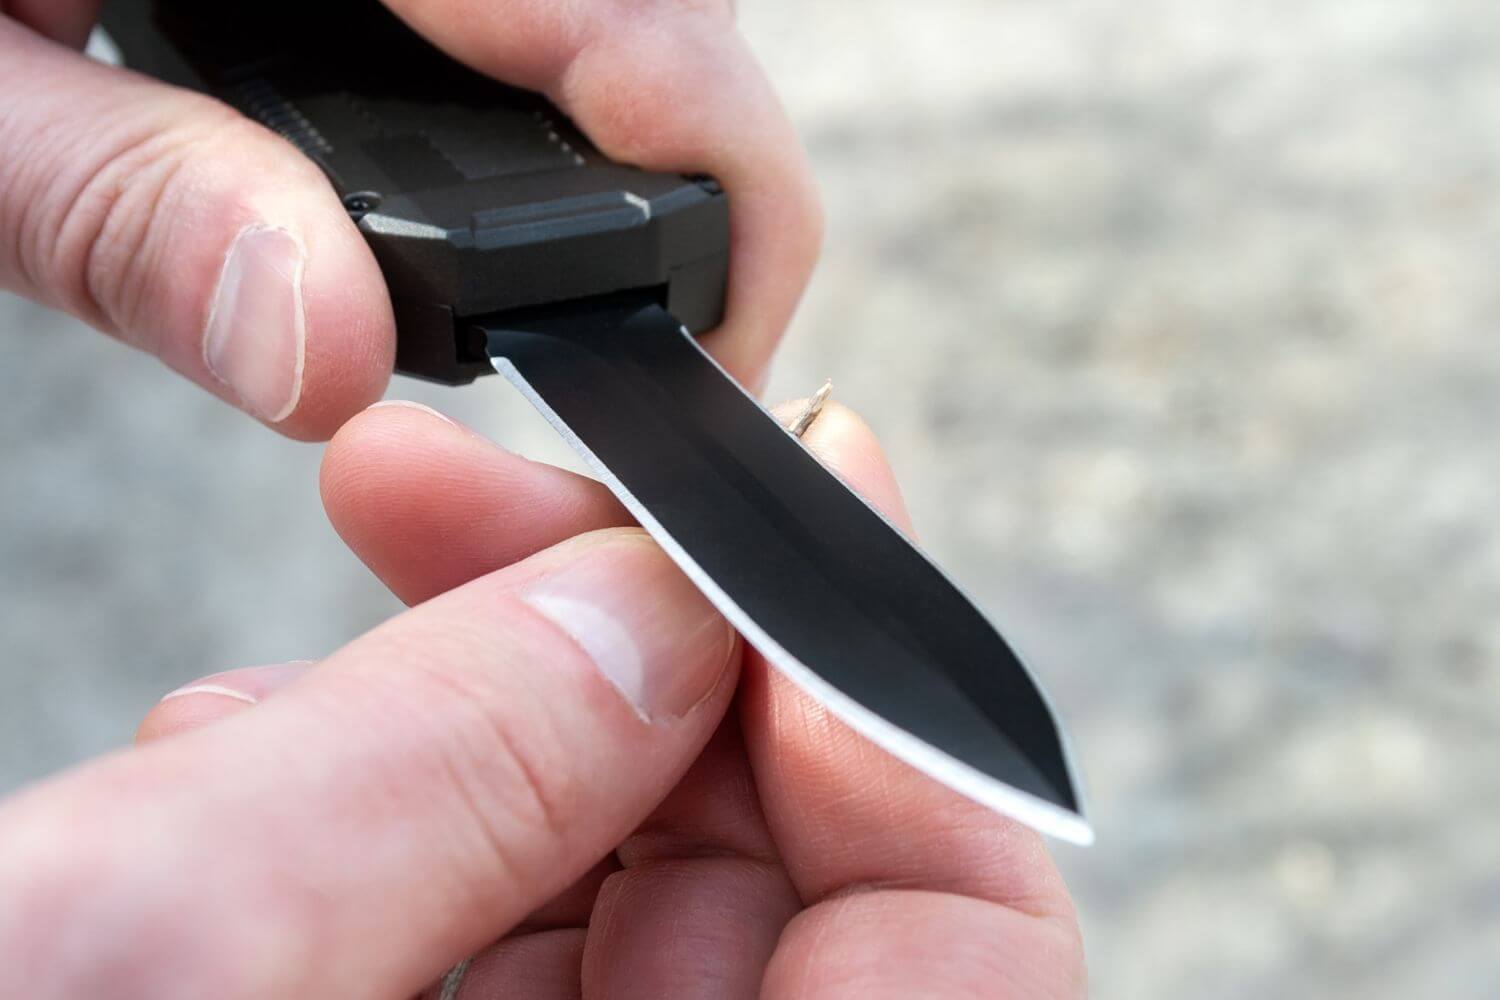 hands holding an everyday carry knife, with fingertips touching the blade of the knife